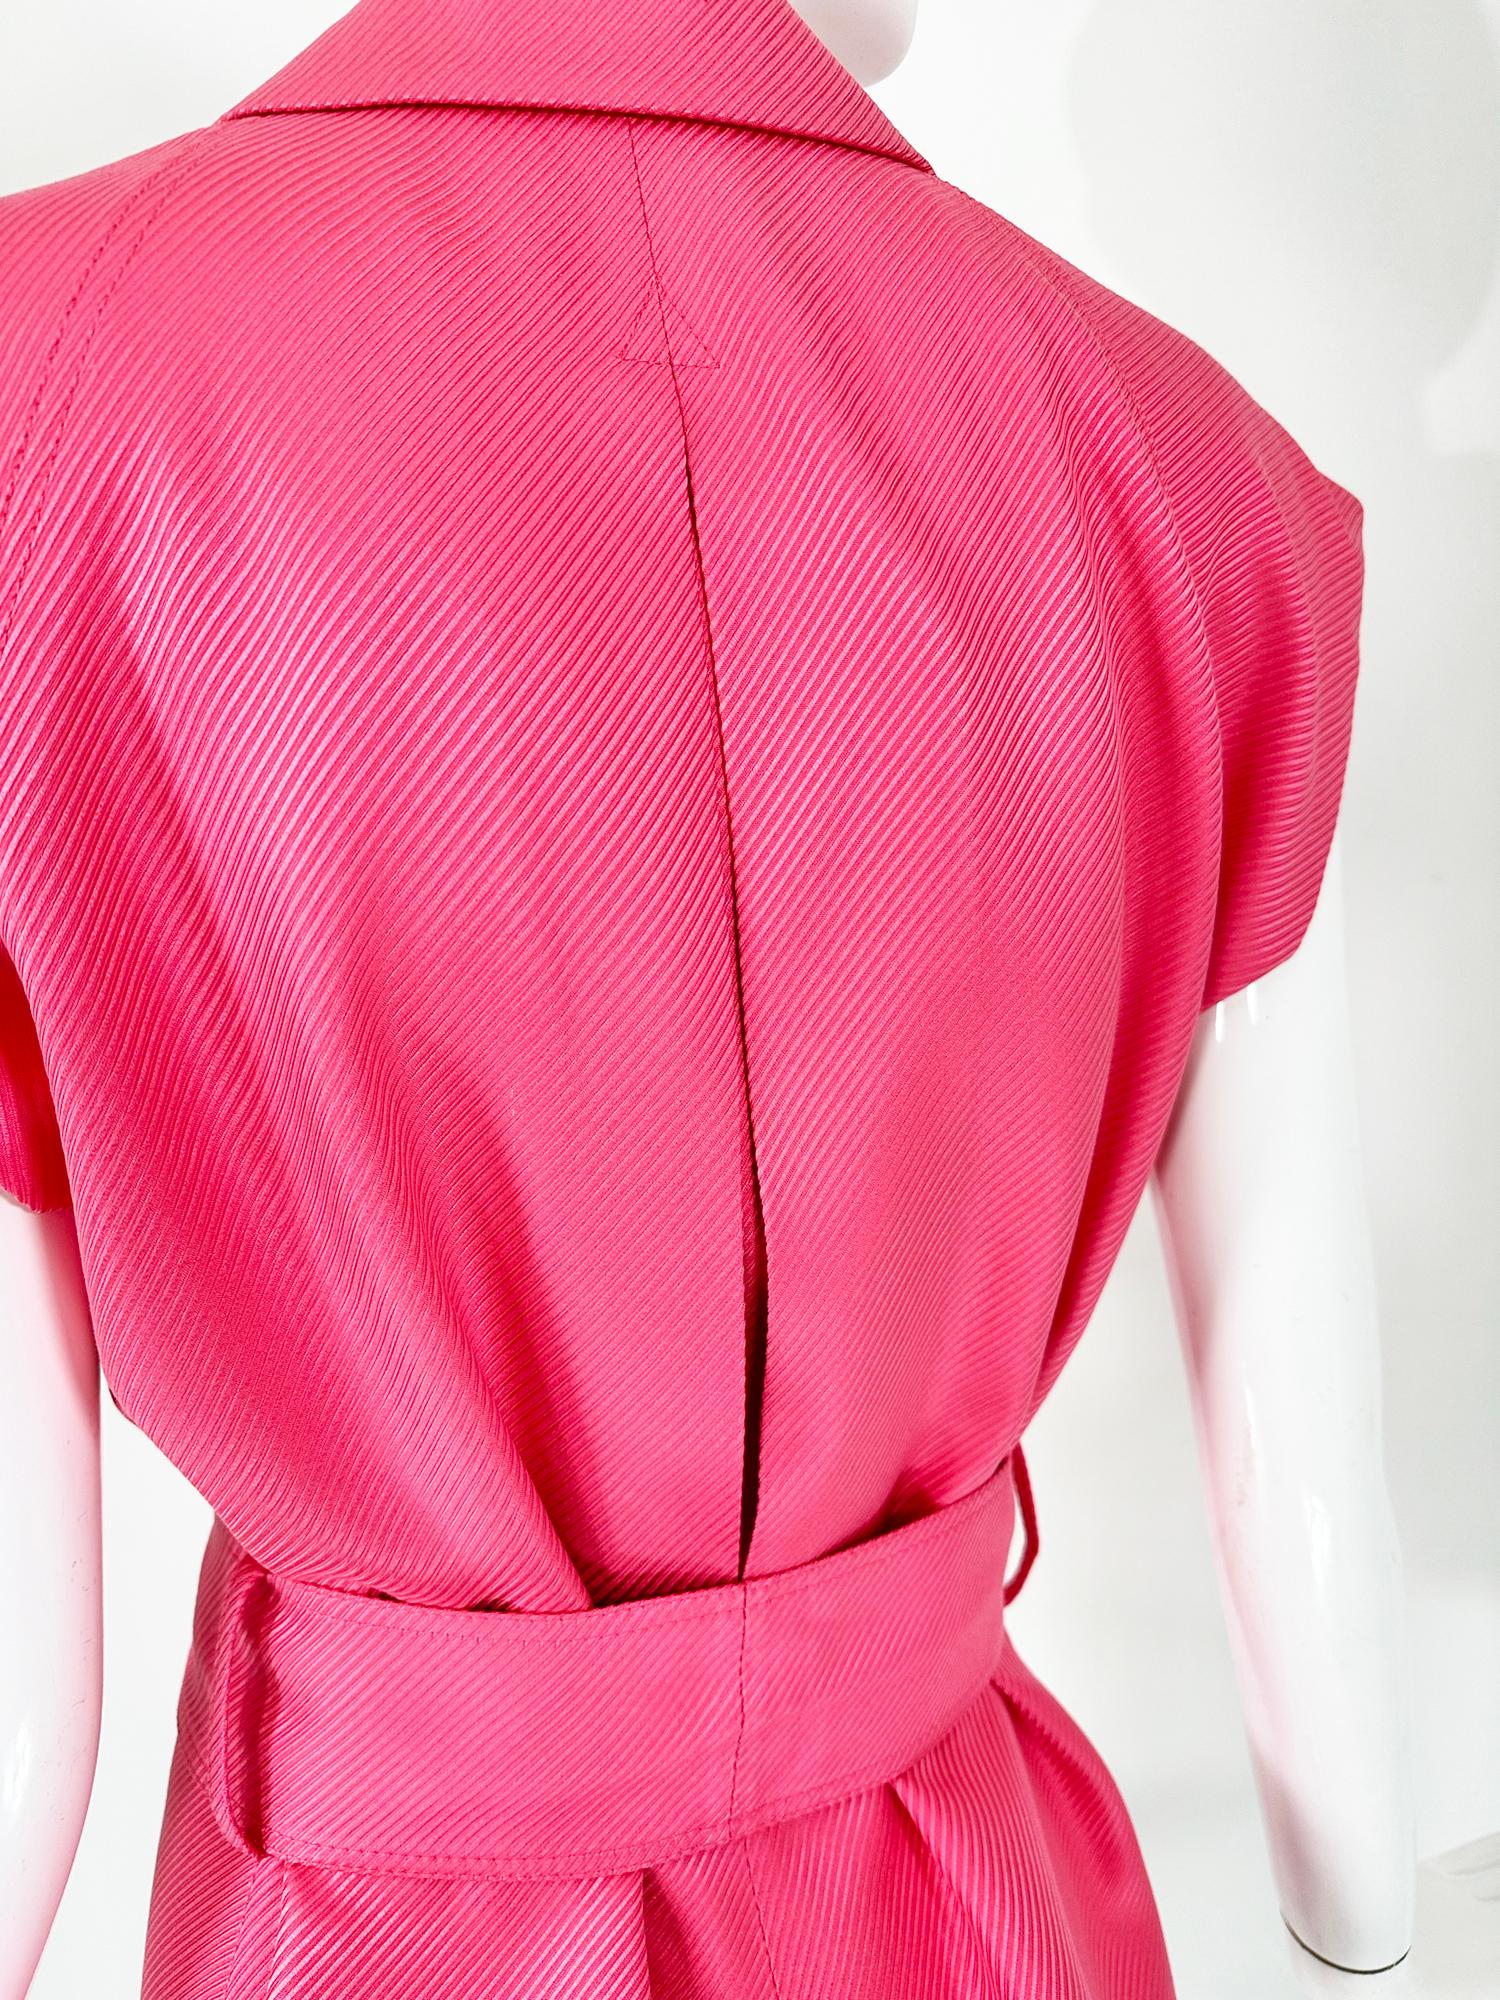 Gianni Versace Couture Pink Silk Twill Cap Sleeve Belted Wrap Jacket 42 8